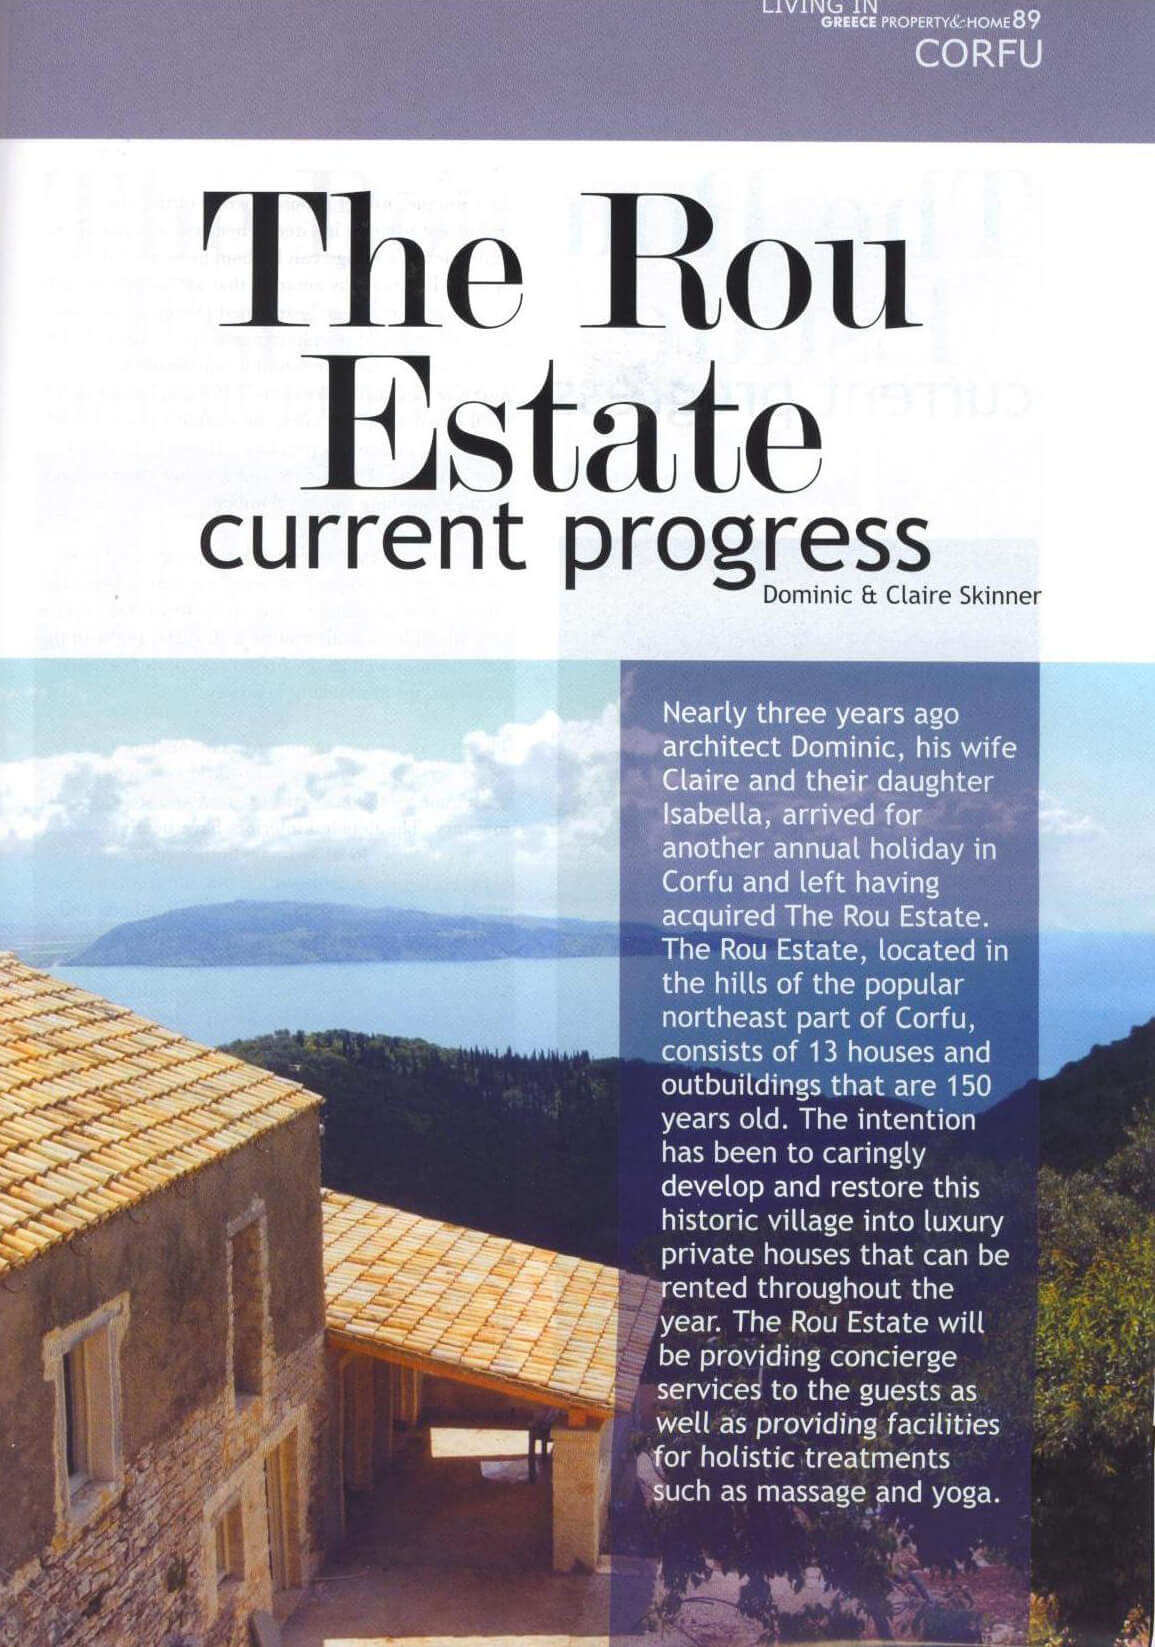 2006_ROU ESTATE_property&home greece_issue 26_pg 02